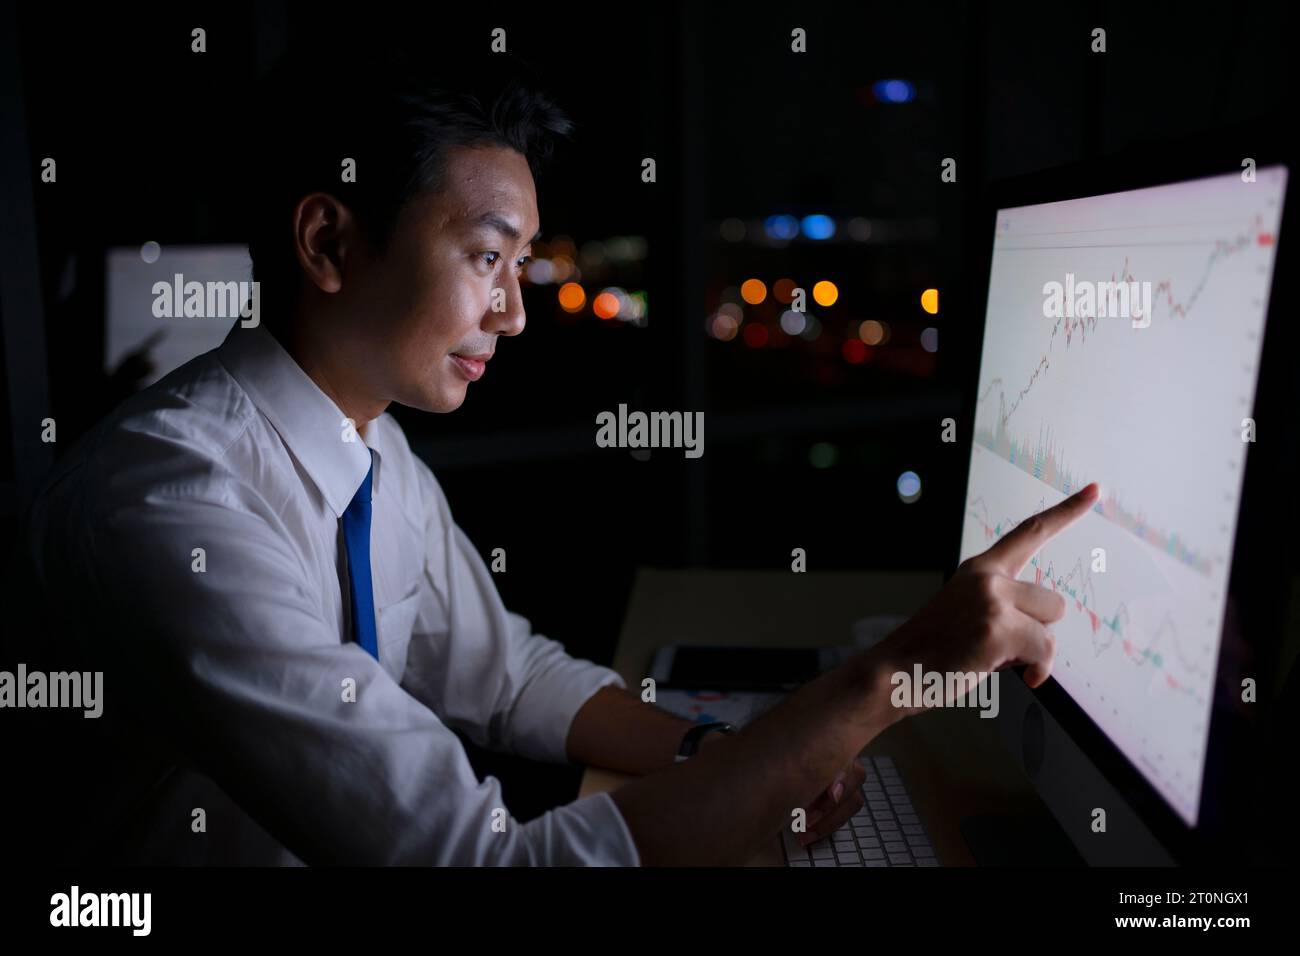 White collar workers working late at night. Occupation and working late concept. Stock Photo